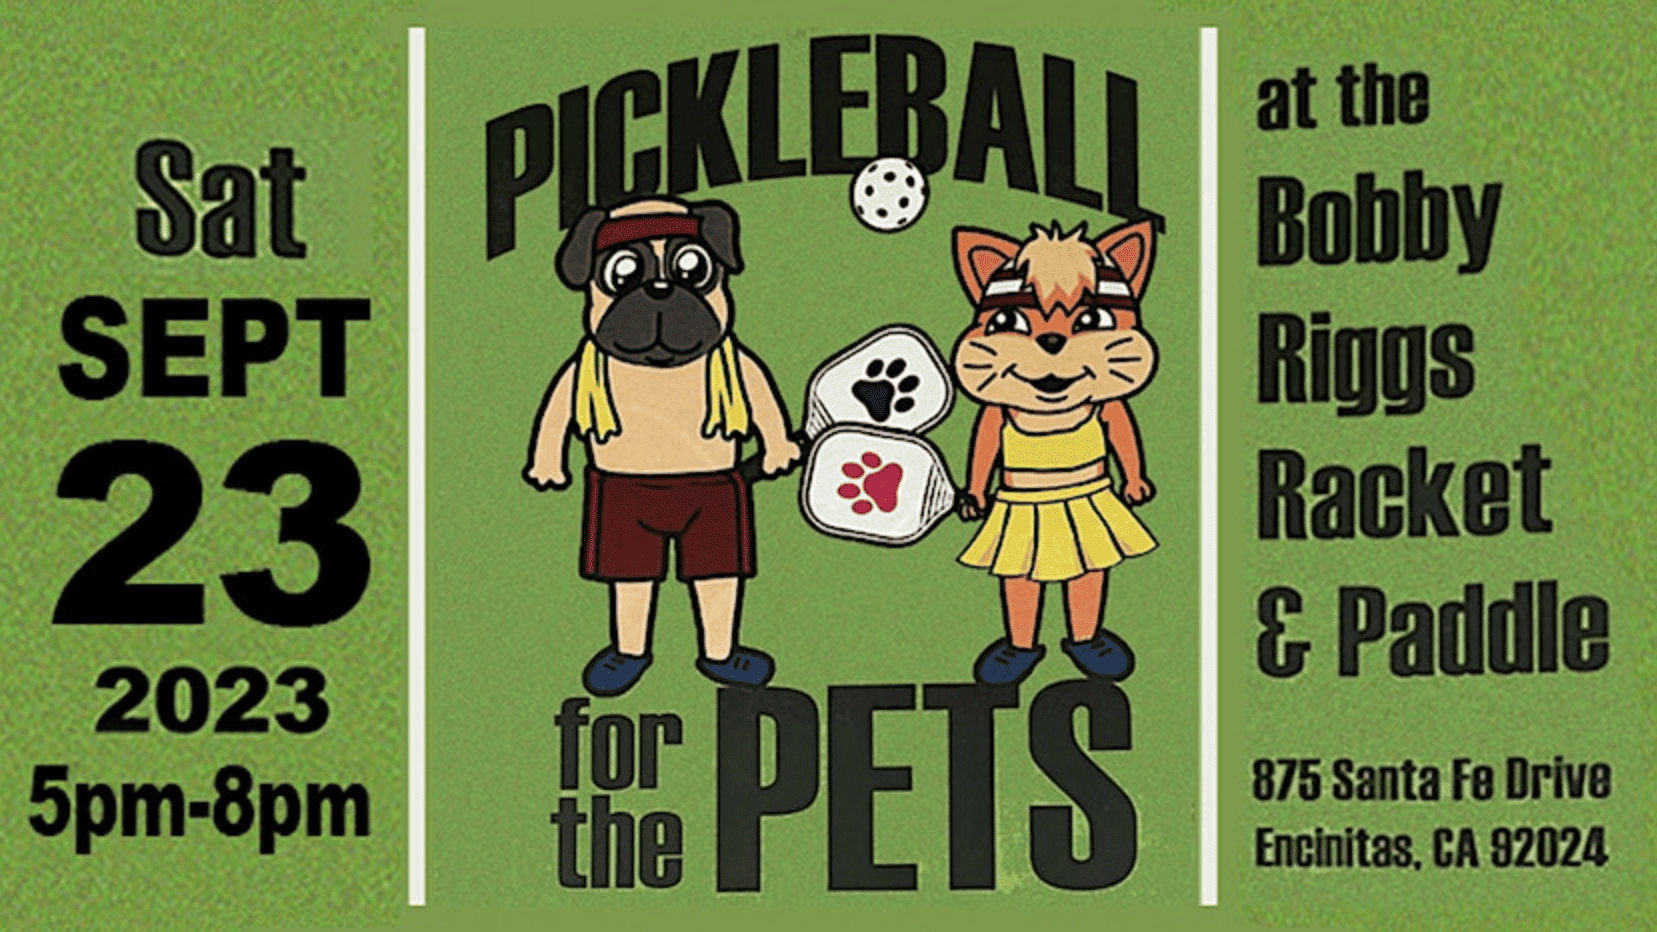 A poster that says Pickleball for the Pets with a dog and a cat on it.